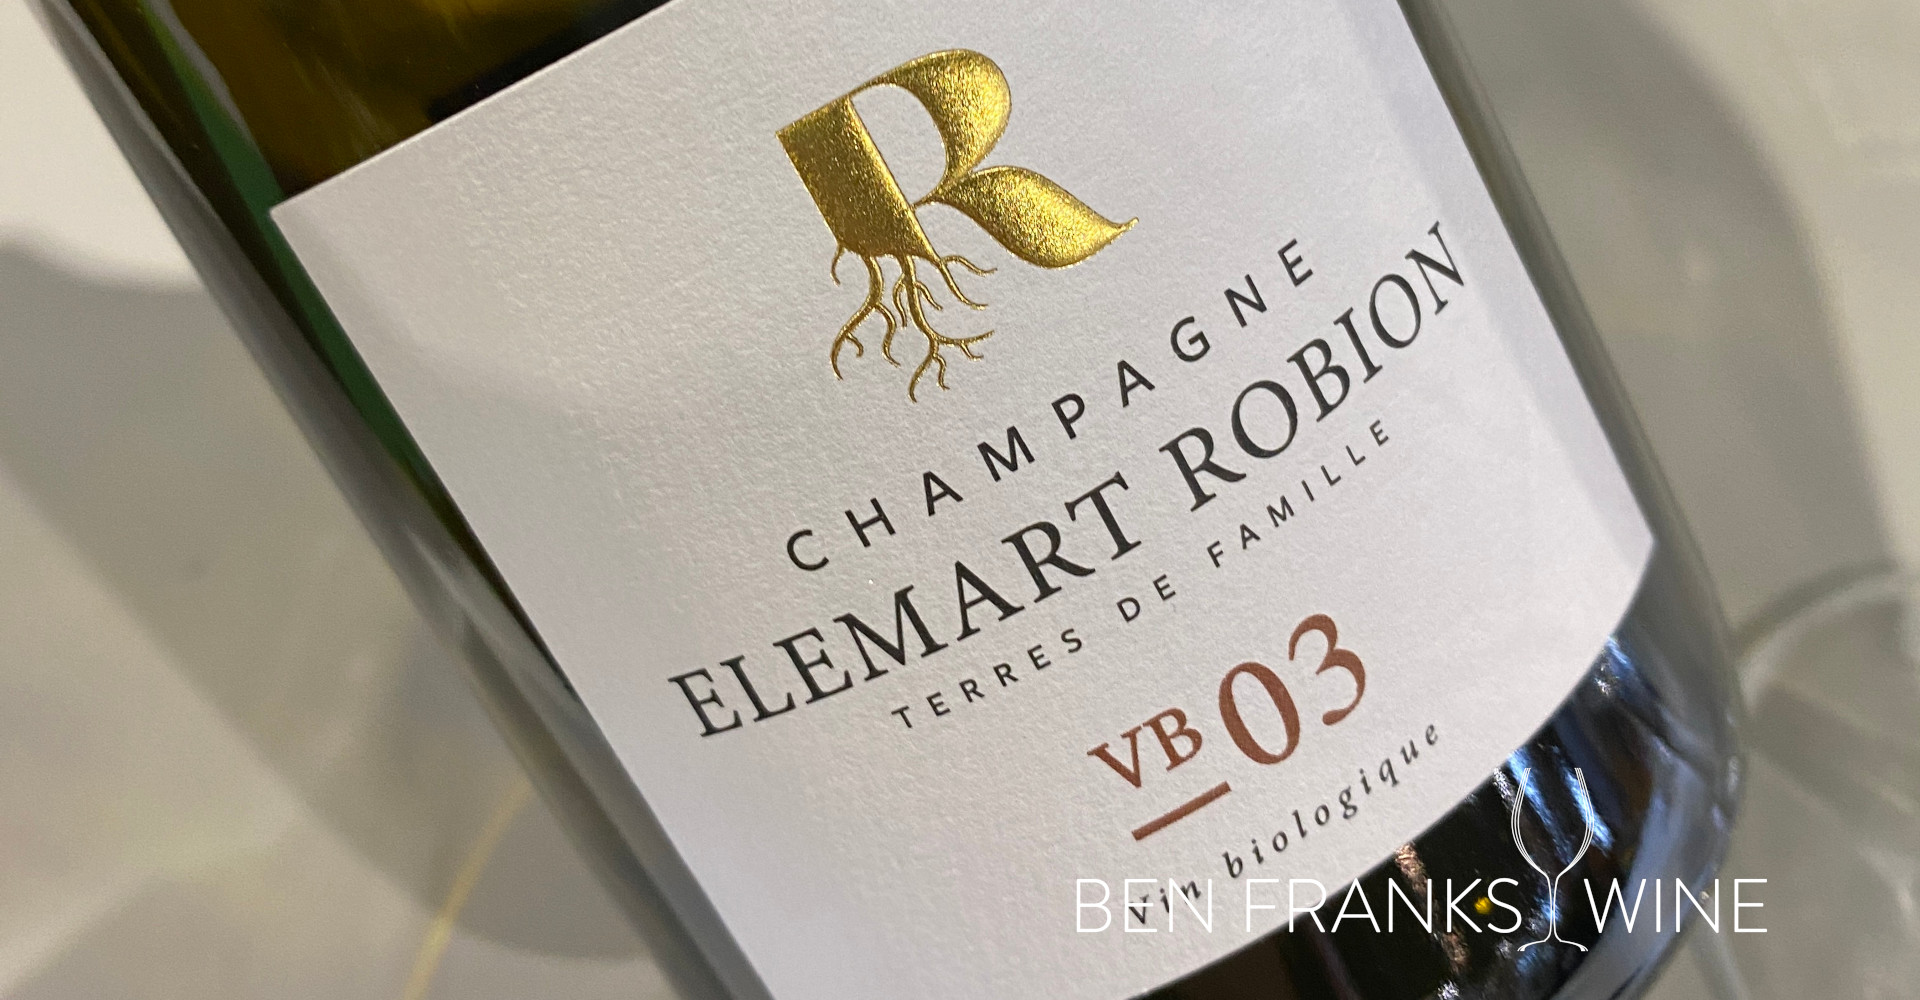 Champagne Elemart Robion sparkling wine from France.